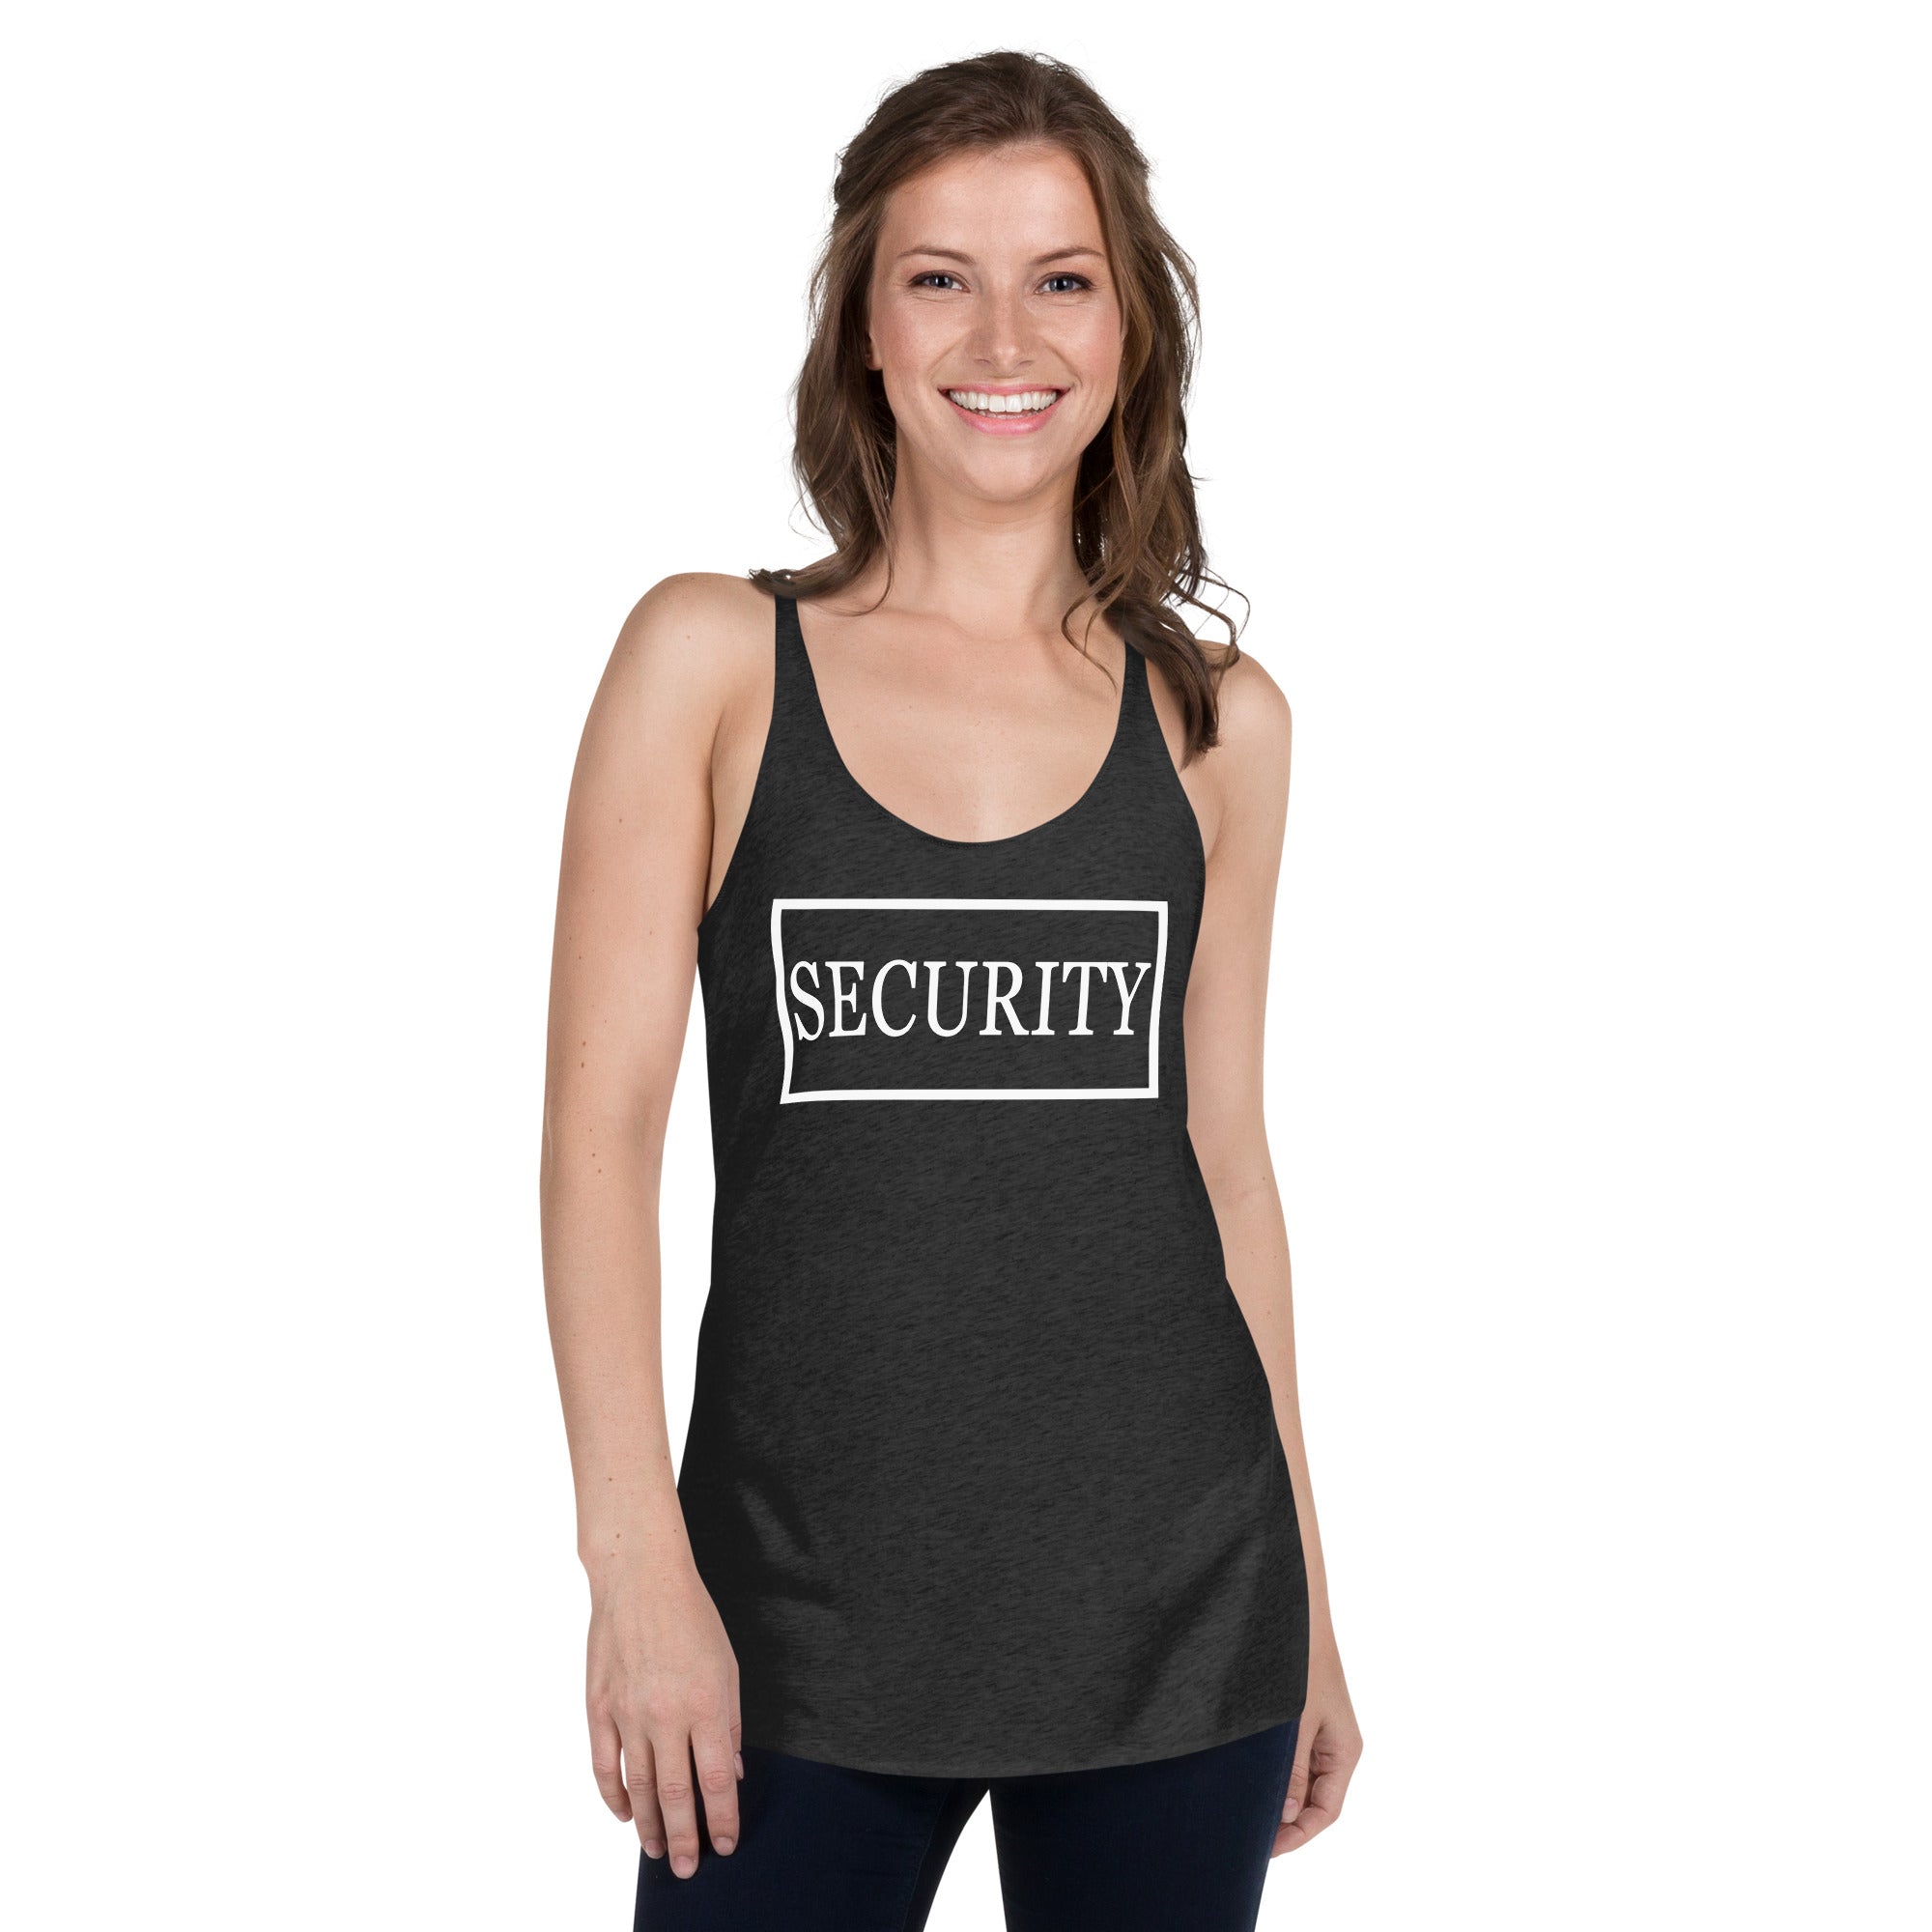 Security Team and Staff Cosplay FNAF Women's Racerback Tank Top Shirt